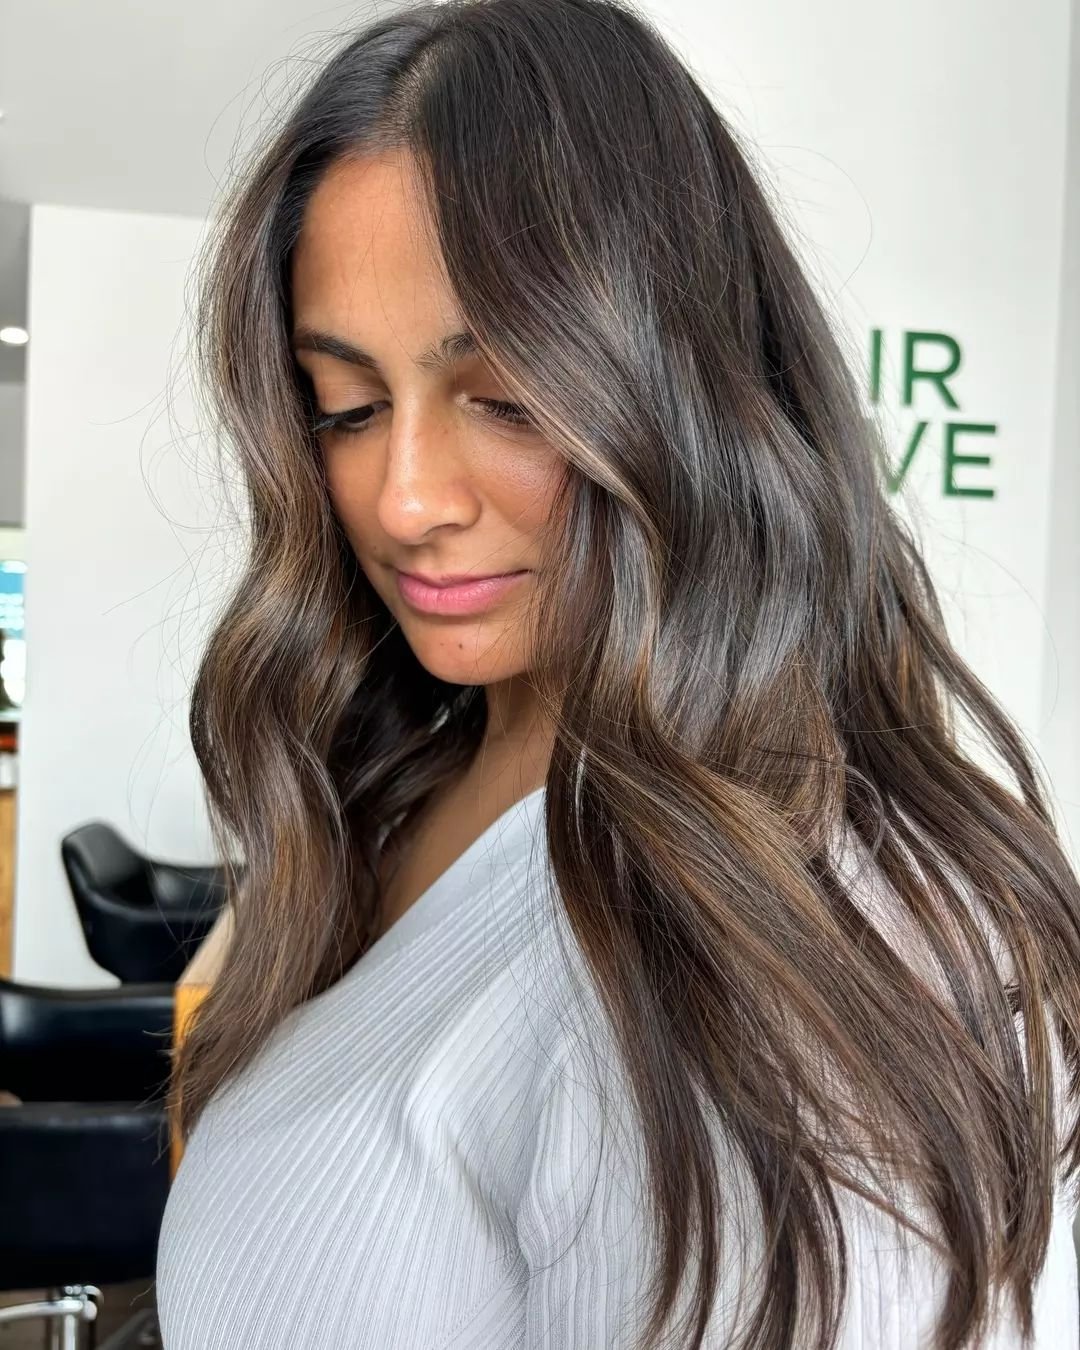 Nourished strands, radiant glow. Elevate your style with the beauty of healthy hair! 💫 

#HairElevation
#PalmyraHairExperience #WAHairSalon #PalmyraBeautyHub #HighQualityHairWA #PalmyraHairMasters #5StarHairService #WAHairCare #PalmyraHairExperts #T